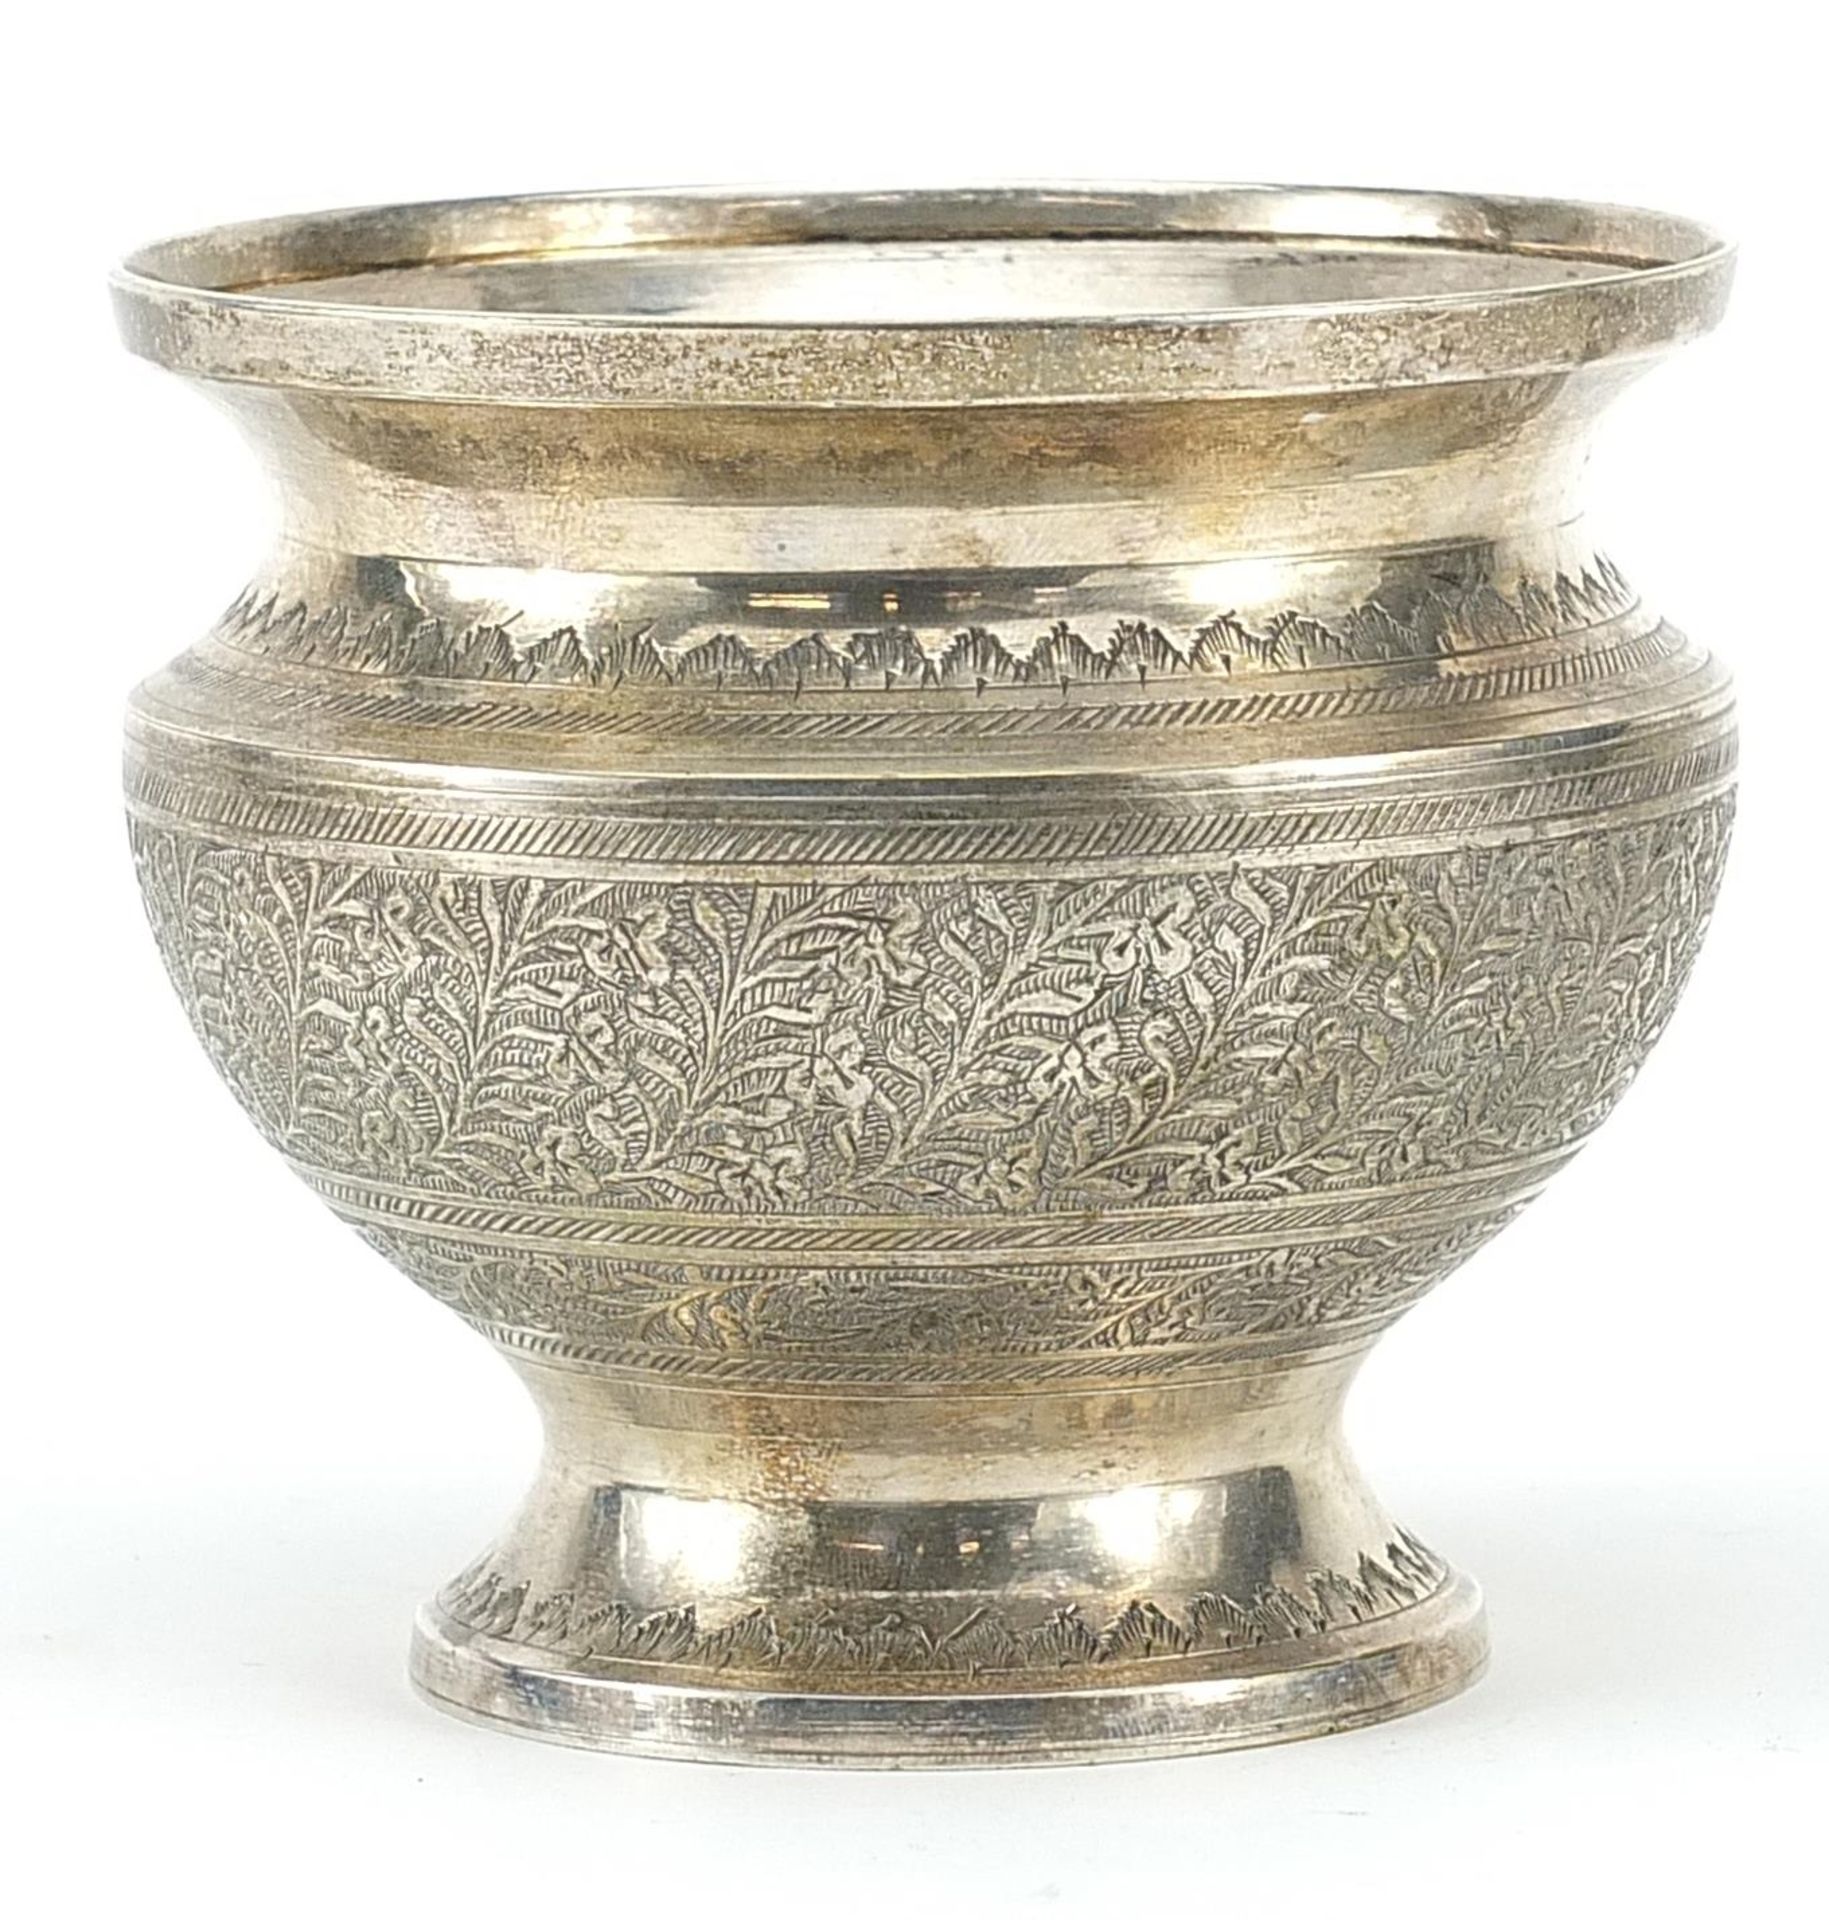 Indian silver coloured metal vase engraved with flowers, 9.5cm high, 329.0g - Image 2 of 4